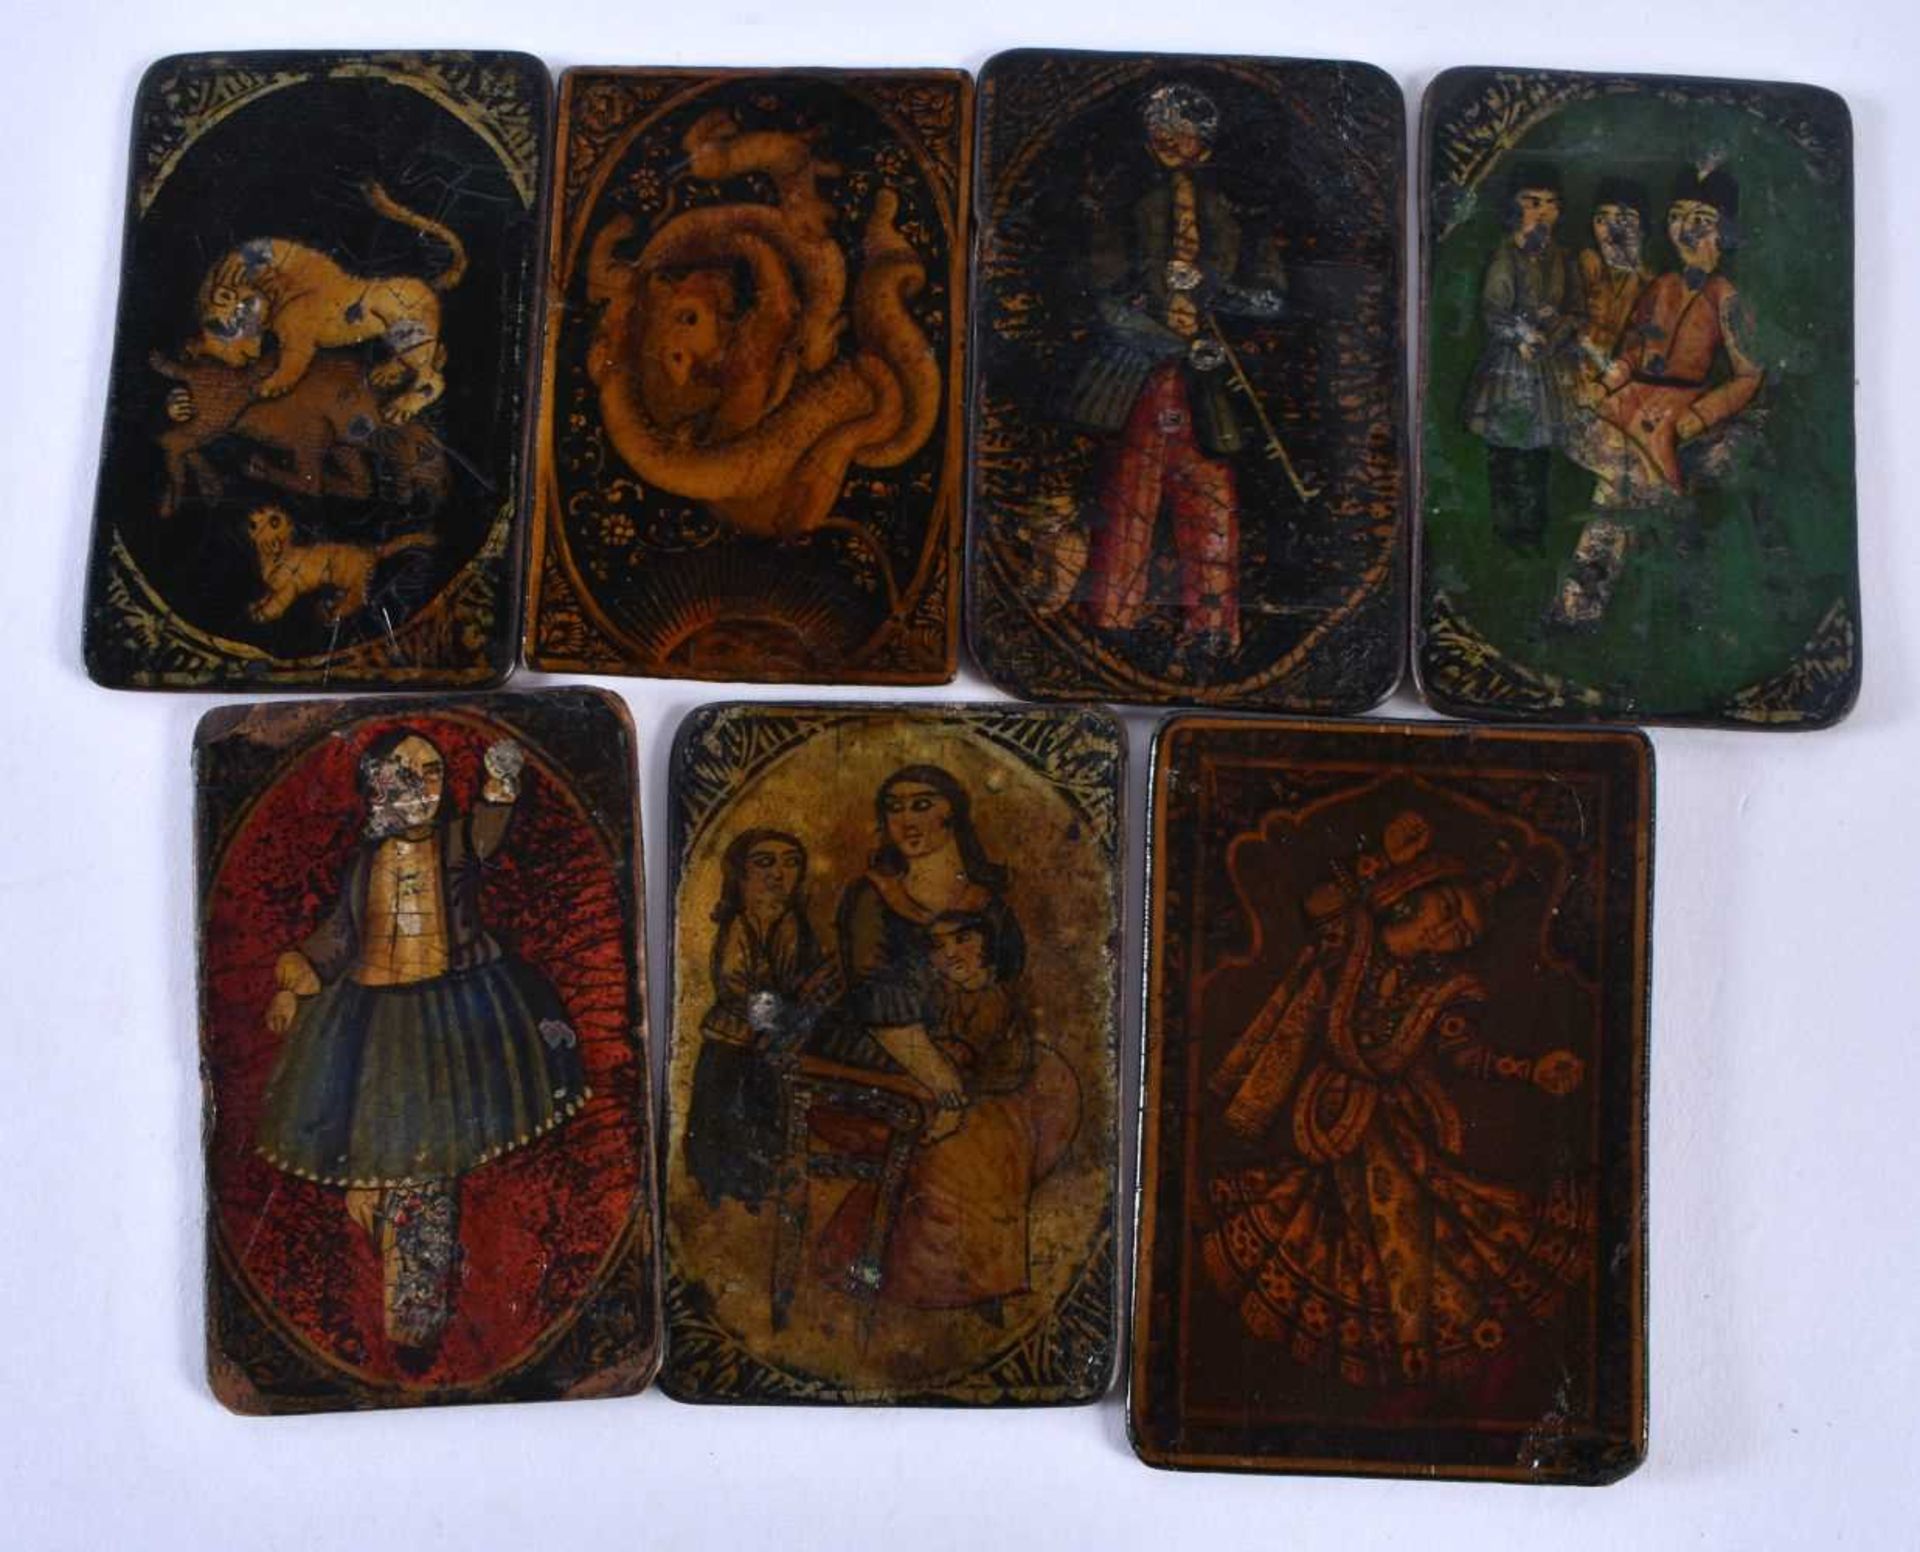 AN UNUSUAL SET OF SEVEN 19TH CENTURY PERSIAN IRANIAN QAJAR LACQUER PAINTINGS depicting figures and